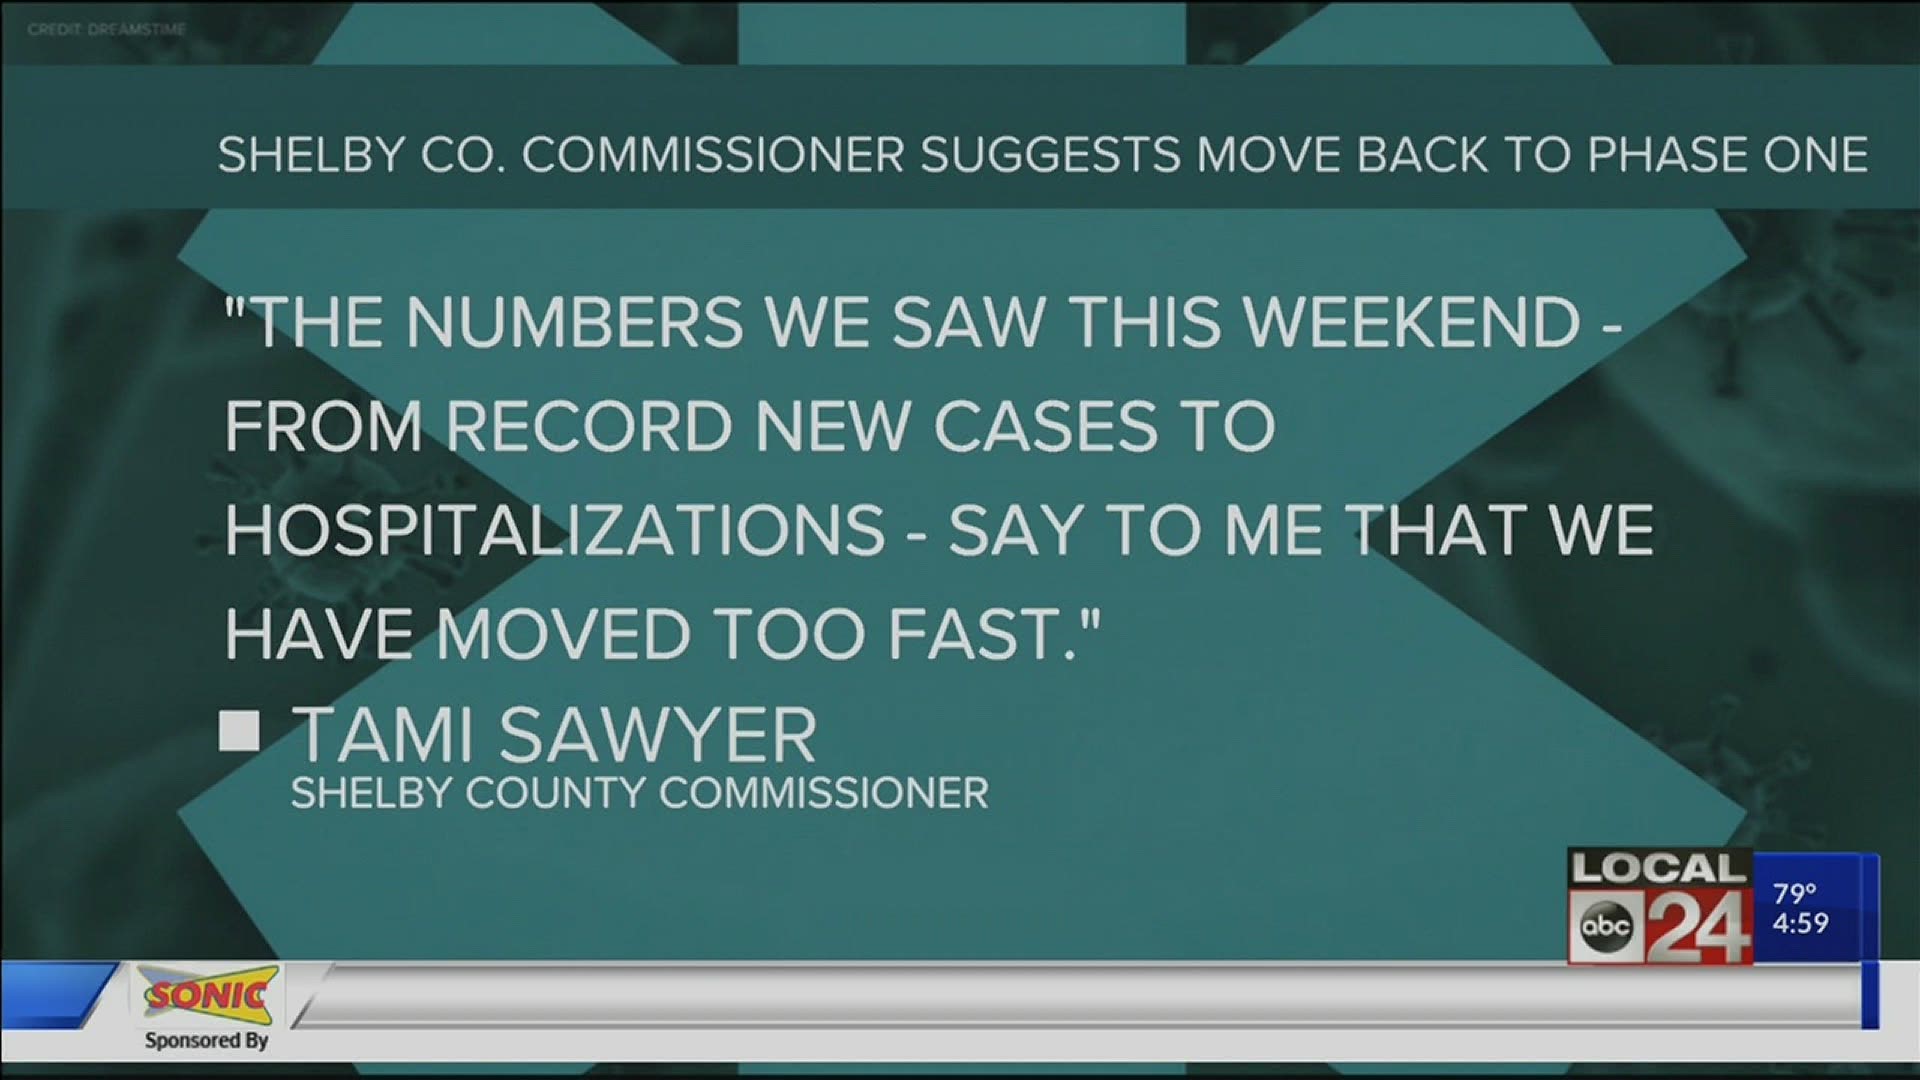 Tami Sawyer's email request cited spike in recent new COVID-19 cases, hospitalizations in Shelby County.